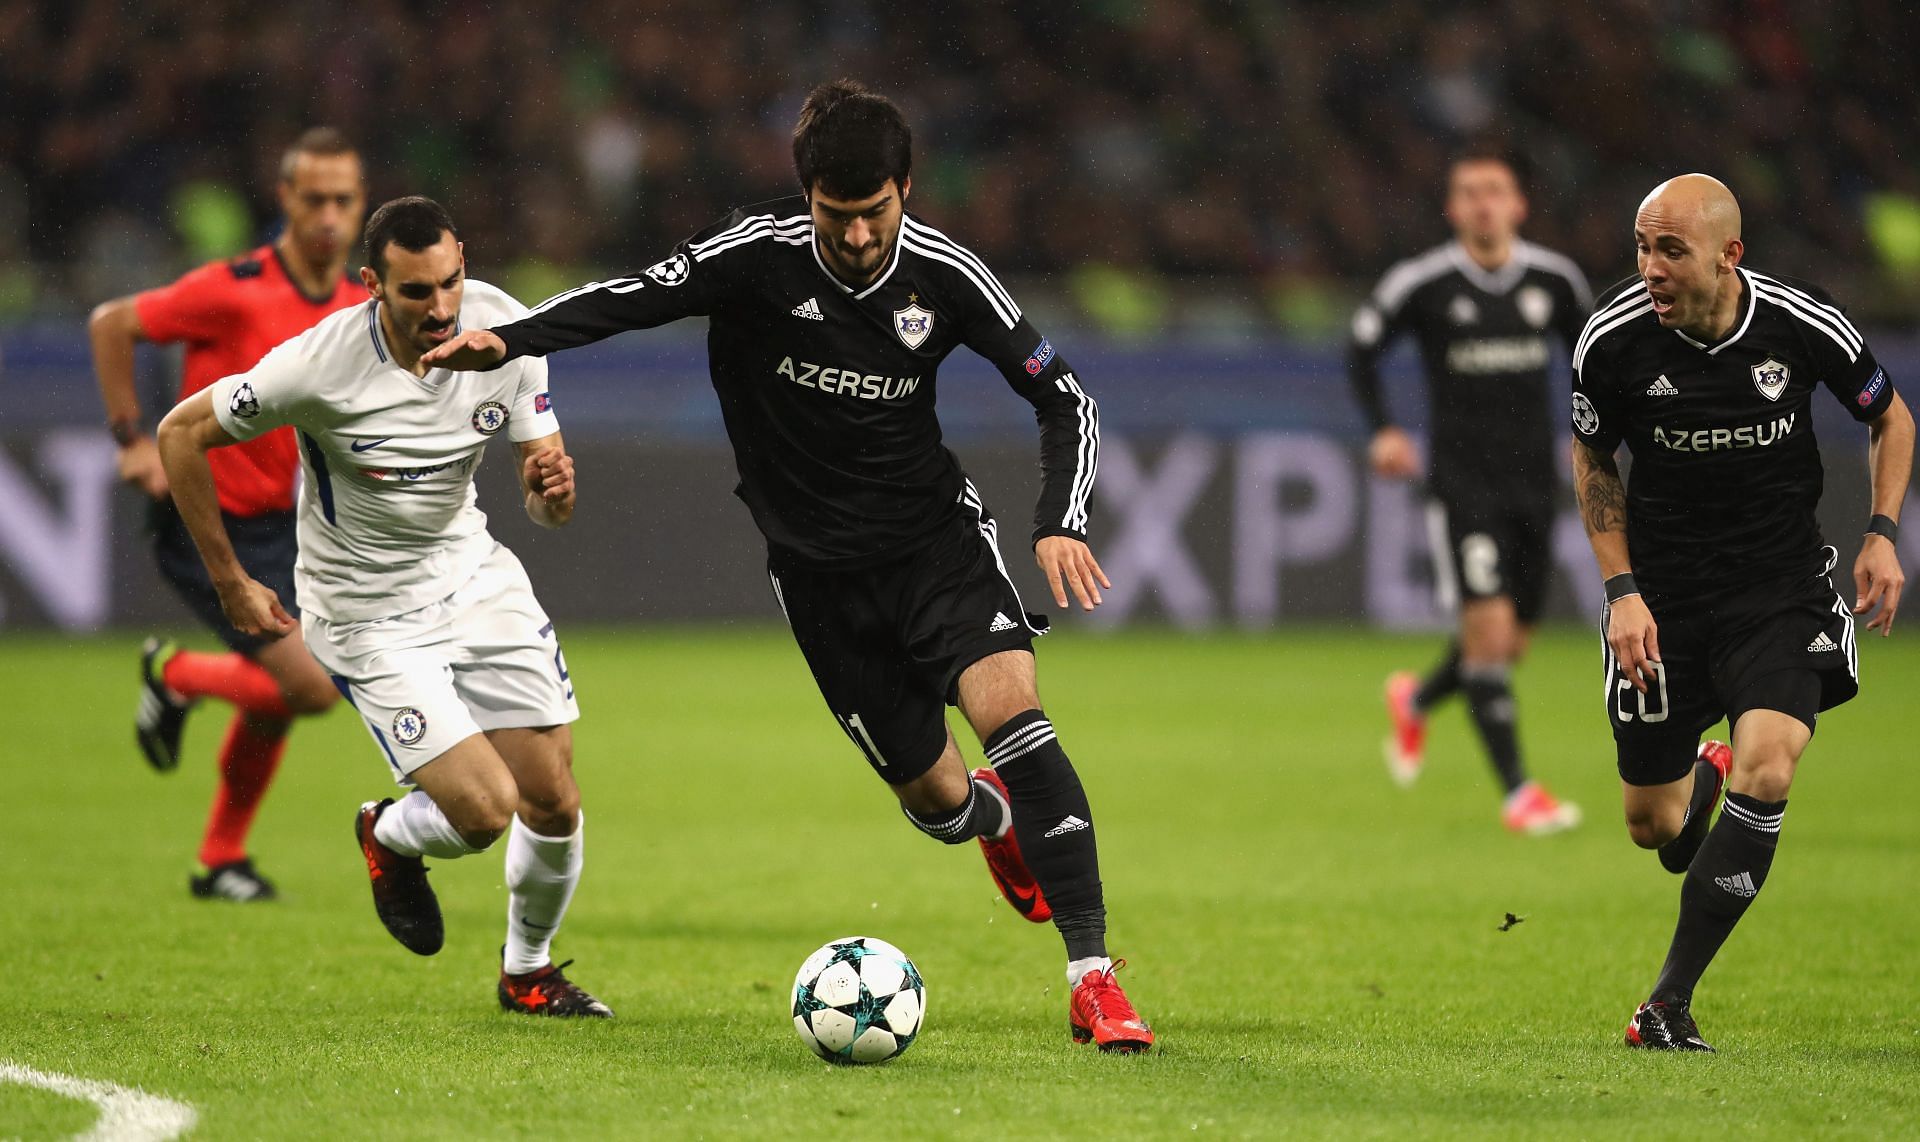 Qarabag will play Ferencvaros in the UEFA Champions League qualifiers.